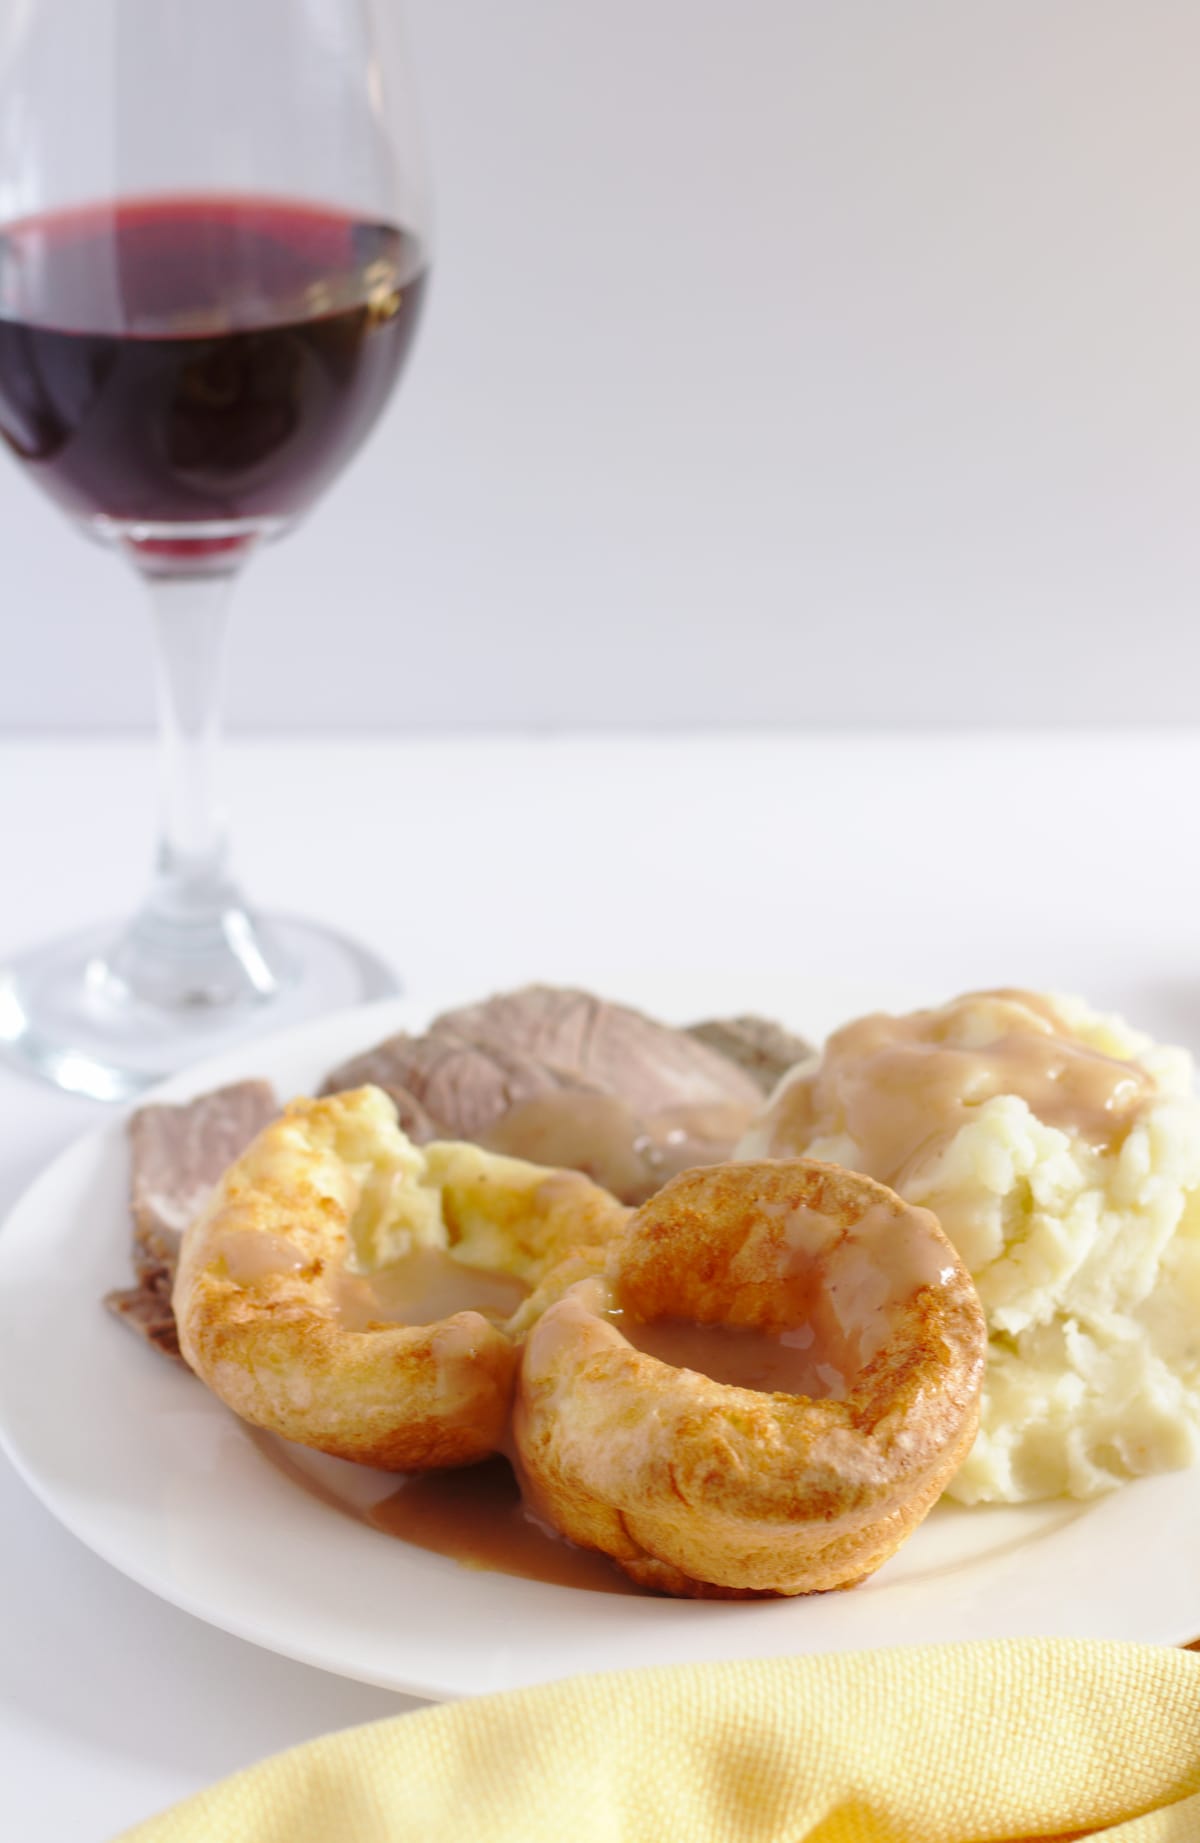 A plate of roast beef, mashed potatoes and Yorkshire pudding with a glass of red wine in the background.